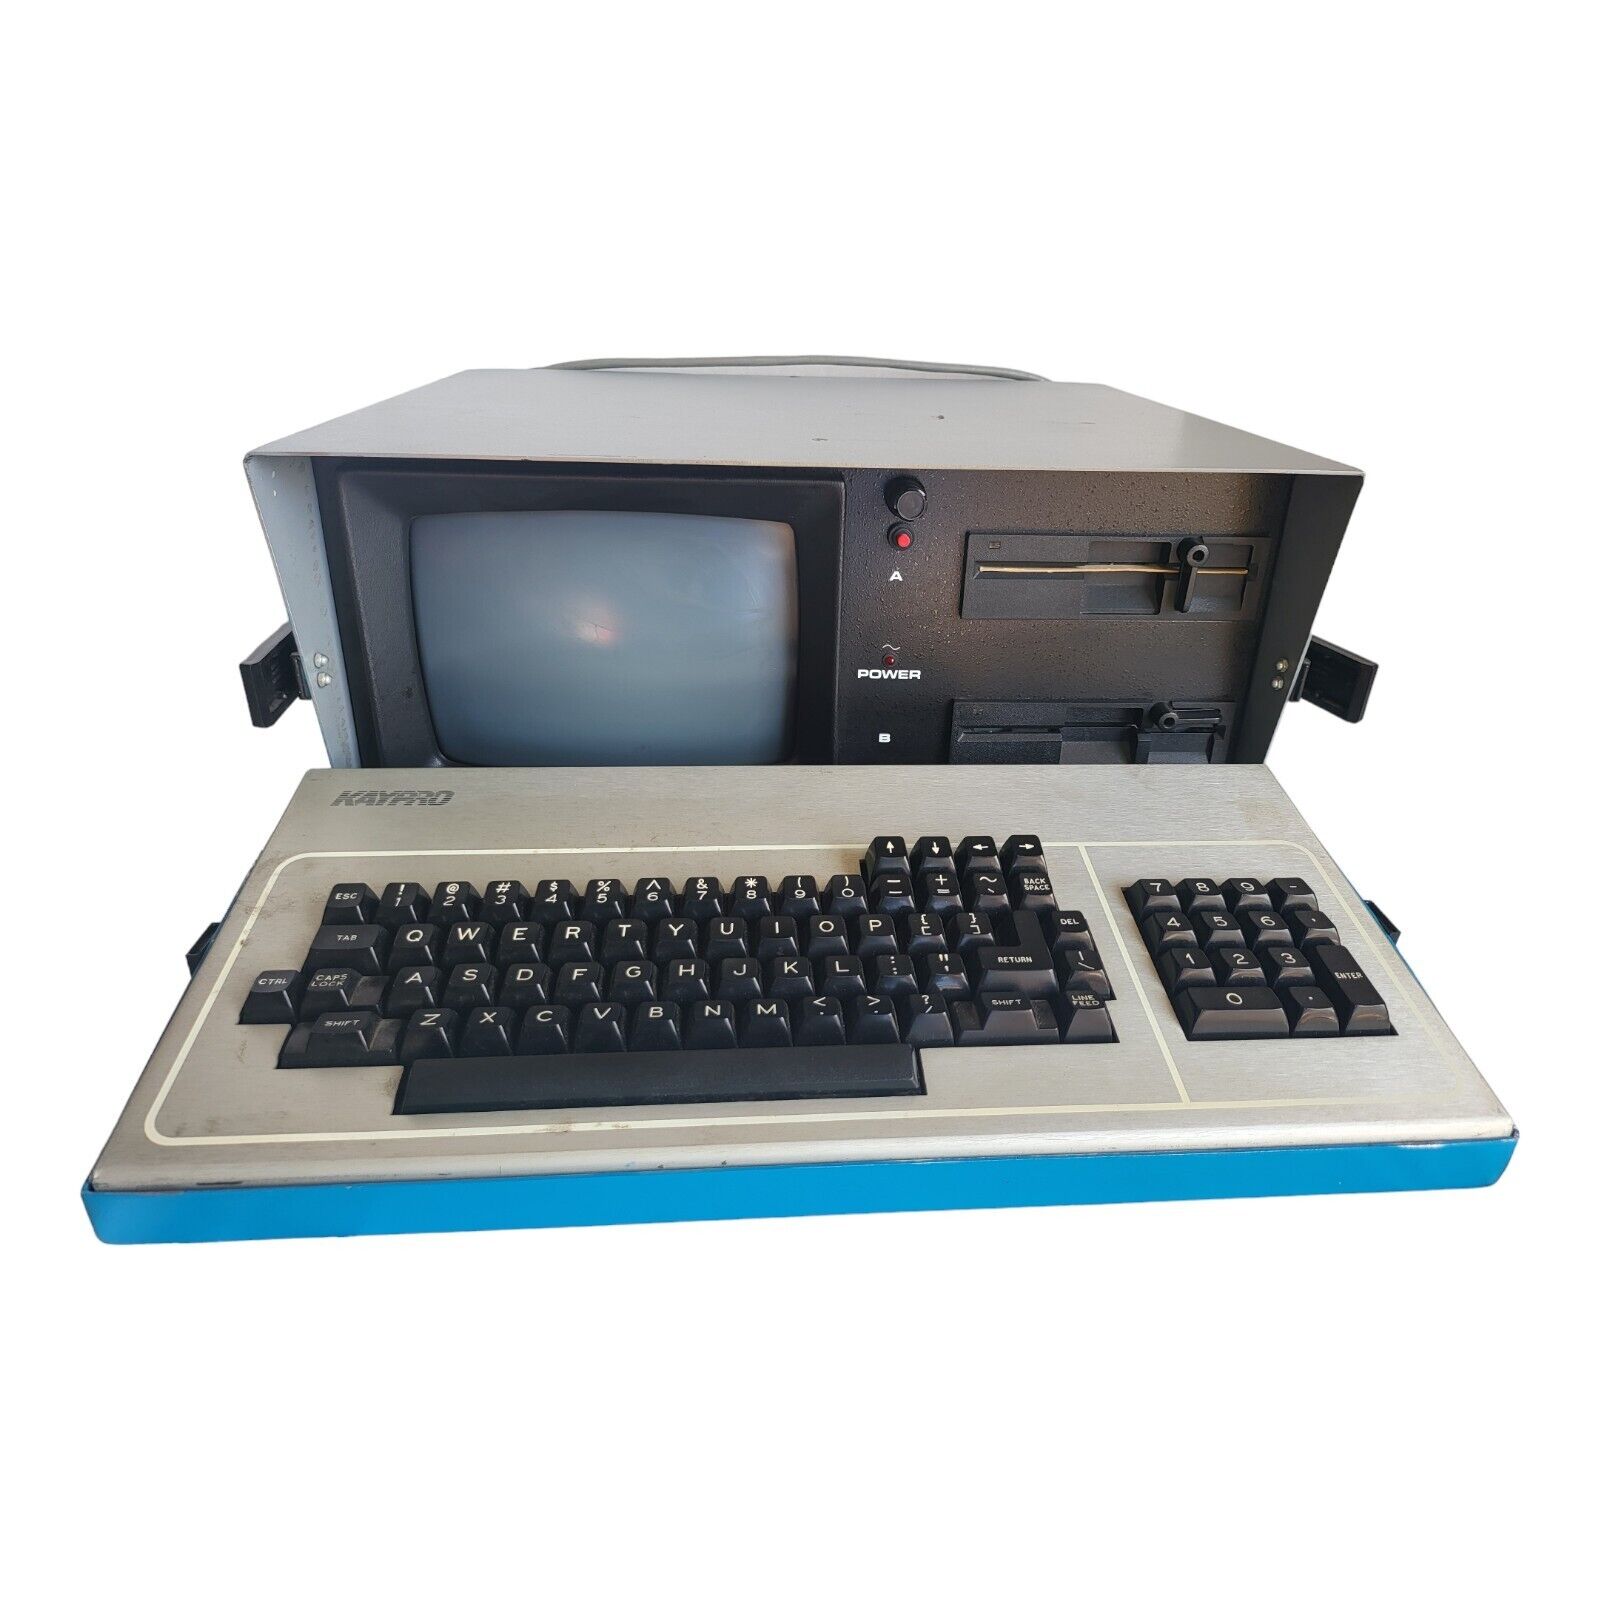 Collectible Rare Vintage Kaypro II Computer PC With Keyboard 81-014 - UNTESTED